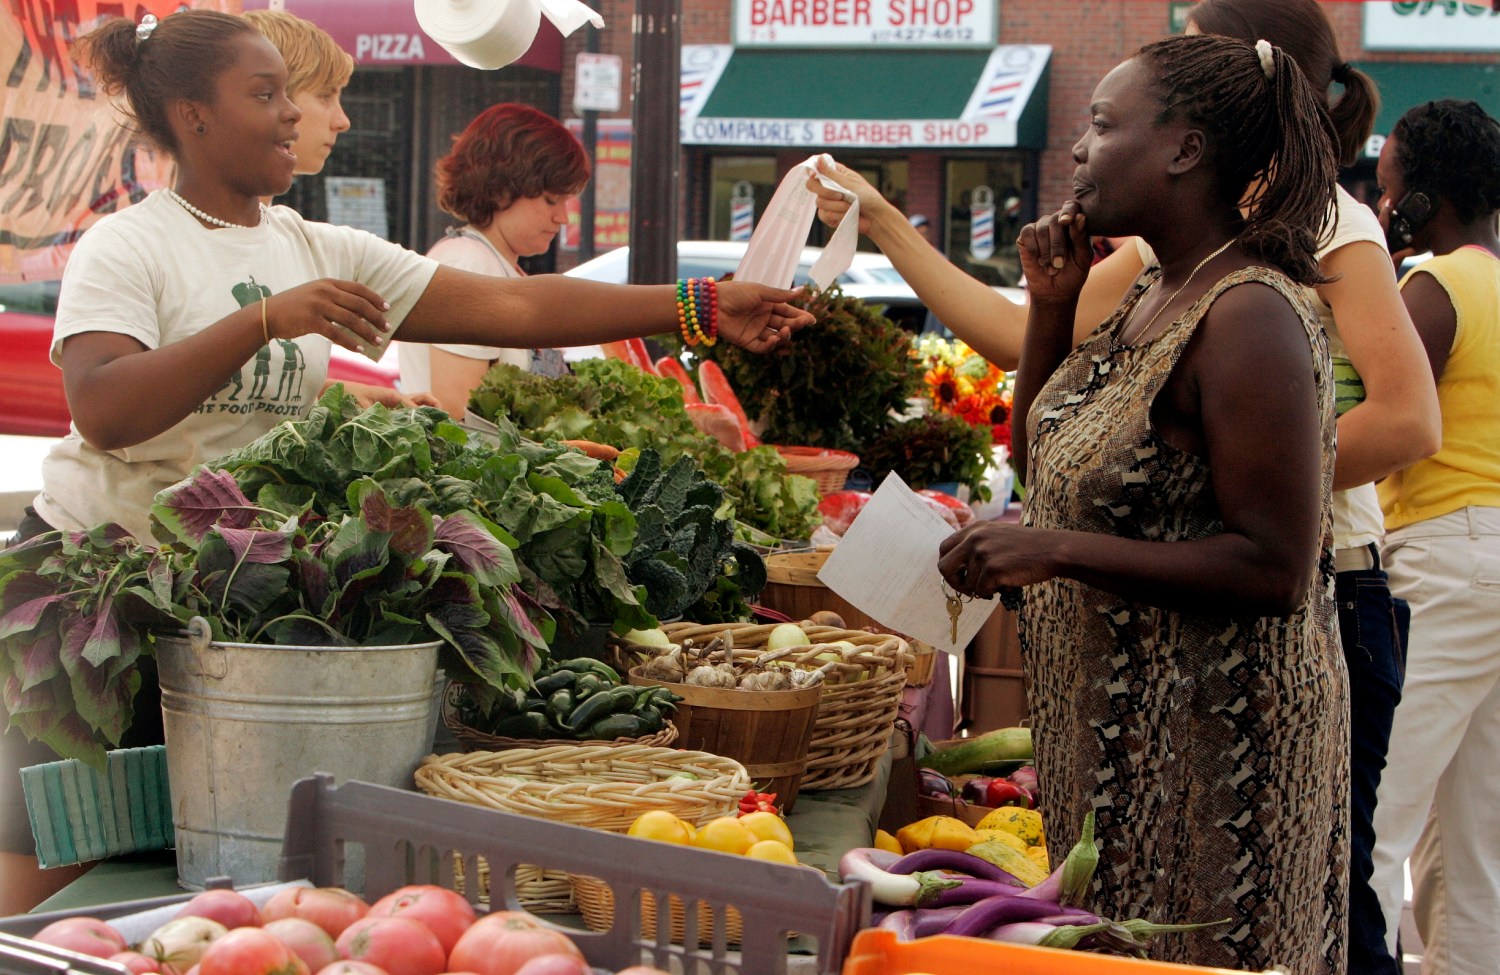 Customers shop for produce at the Food Project's Farmer's Market in the Boston neighborhood of Dorchester, Massachusetts August 14, 2007. Each year The Food Project hires 60 youth to grow food on their farms